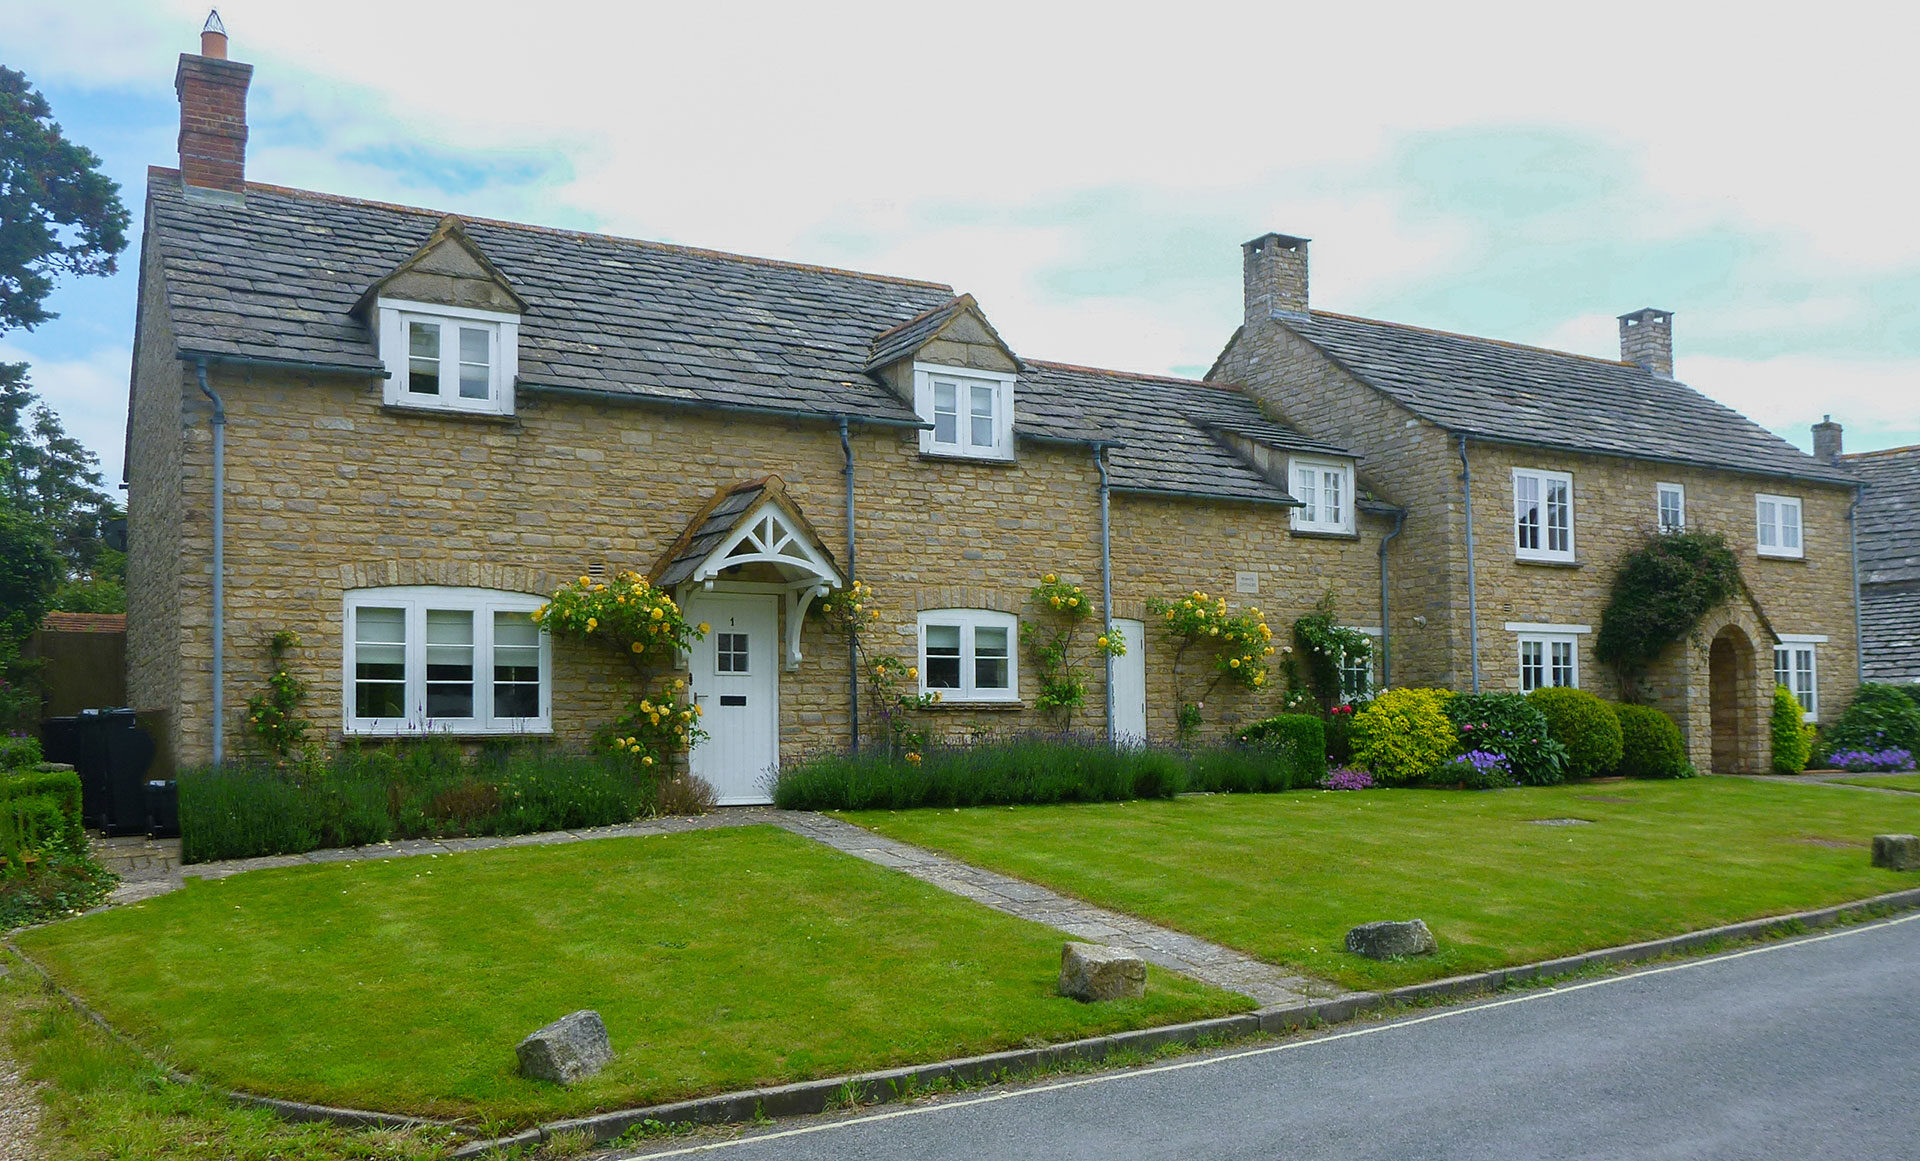 front view of traditional stone cottages with front lawns, taken from road